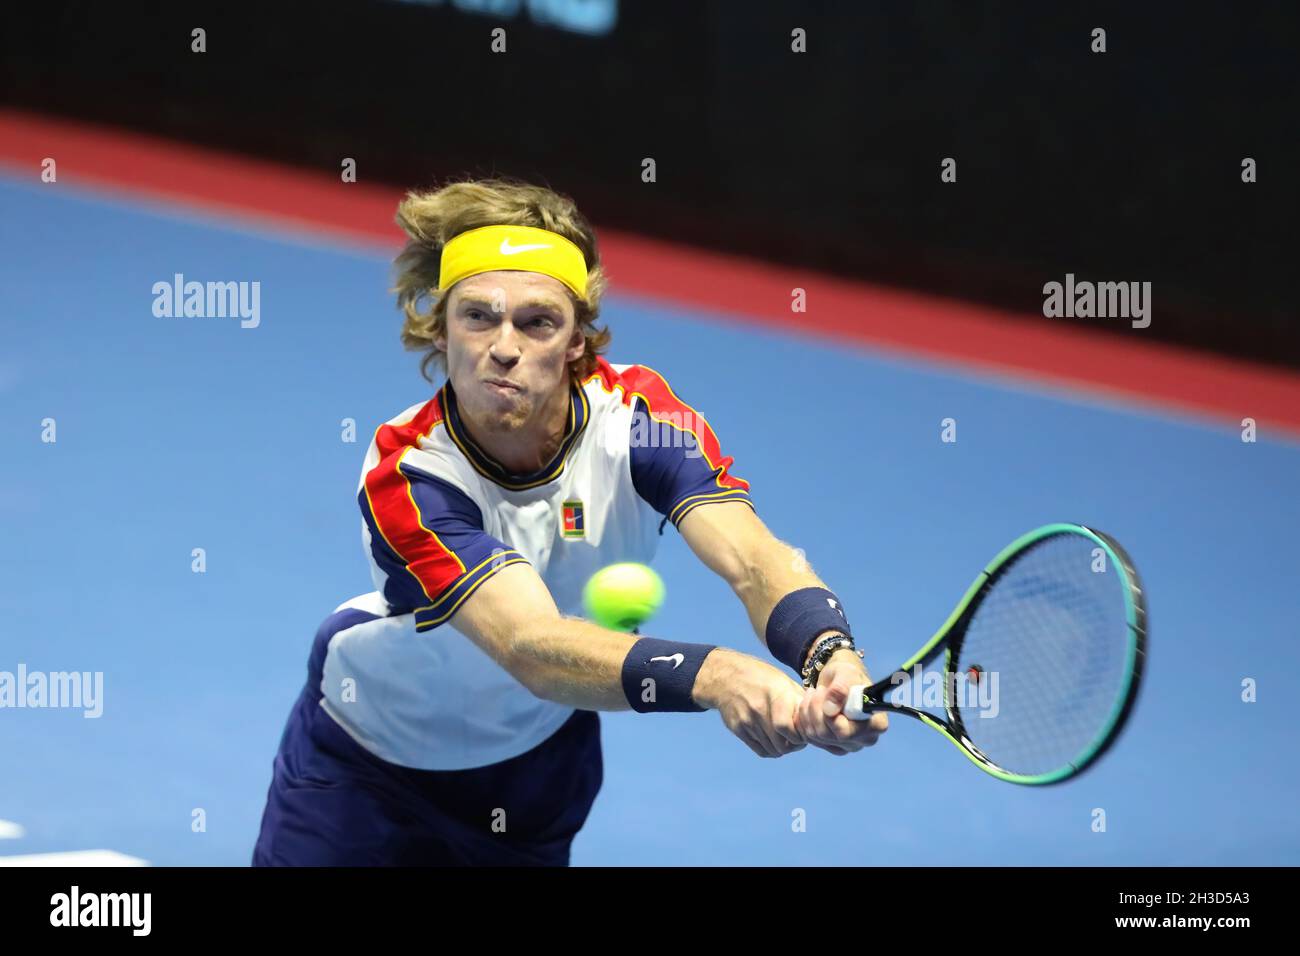 St. Petersburg, Russia. 27th Oct, 2021. Andrey Rublev of Russia seen in action during a match against Ilya Ivashka of Belarus at the St